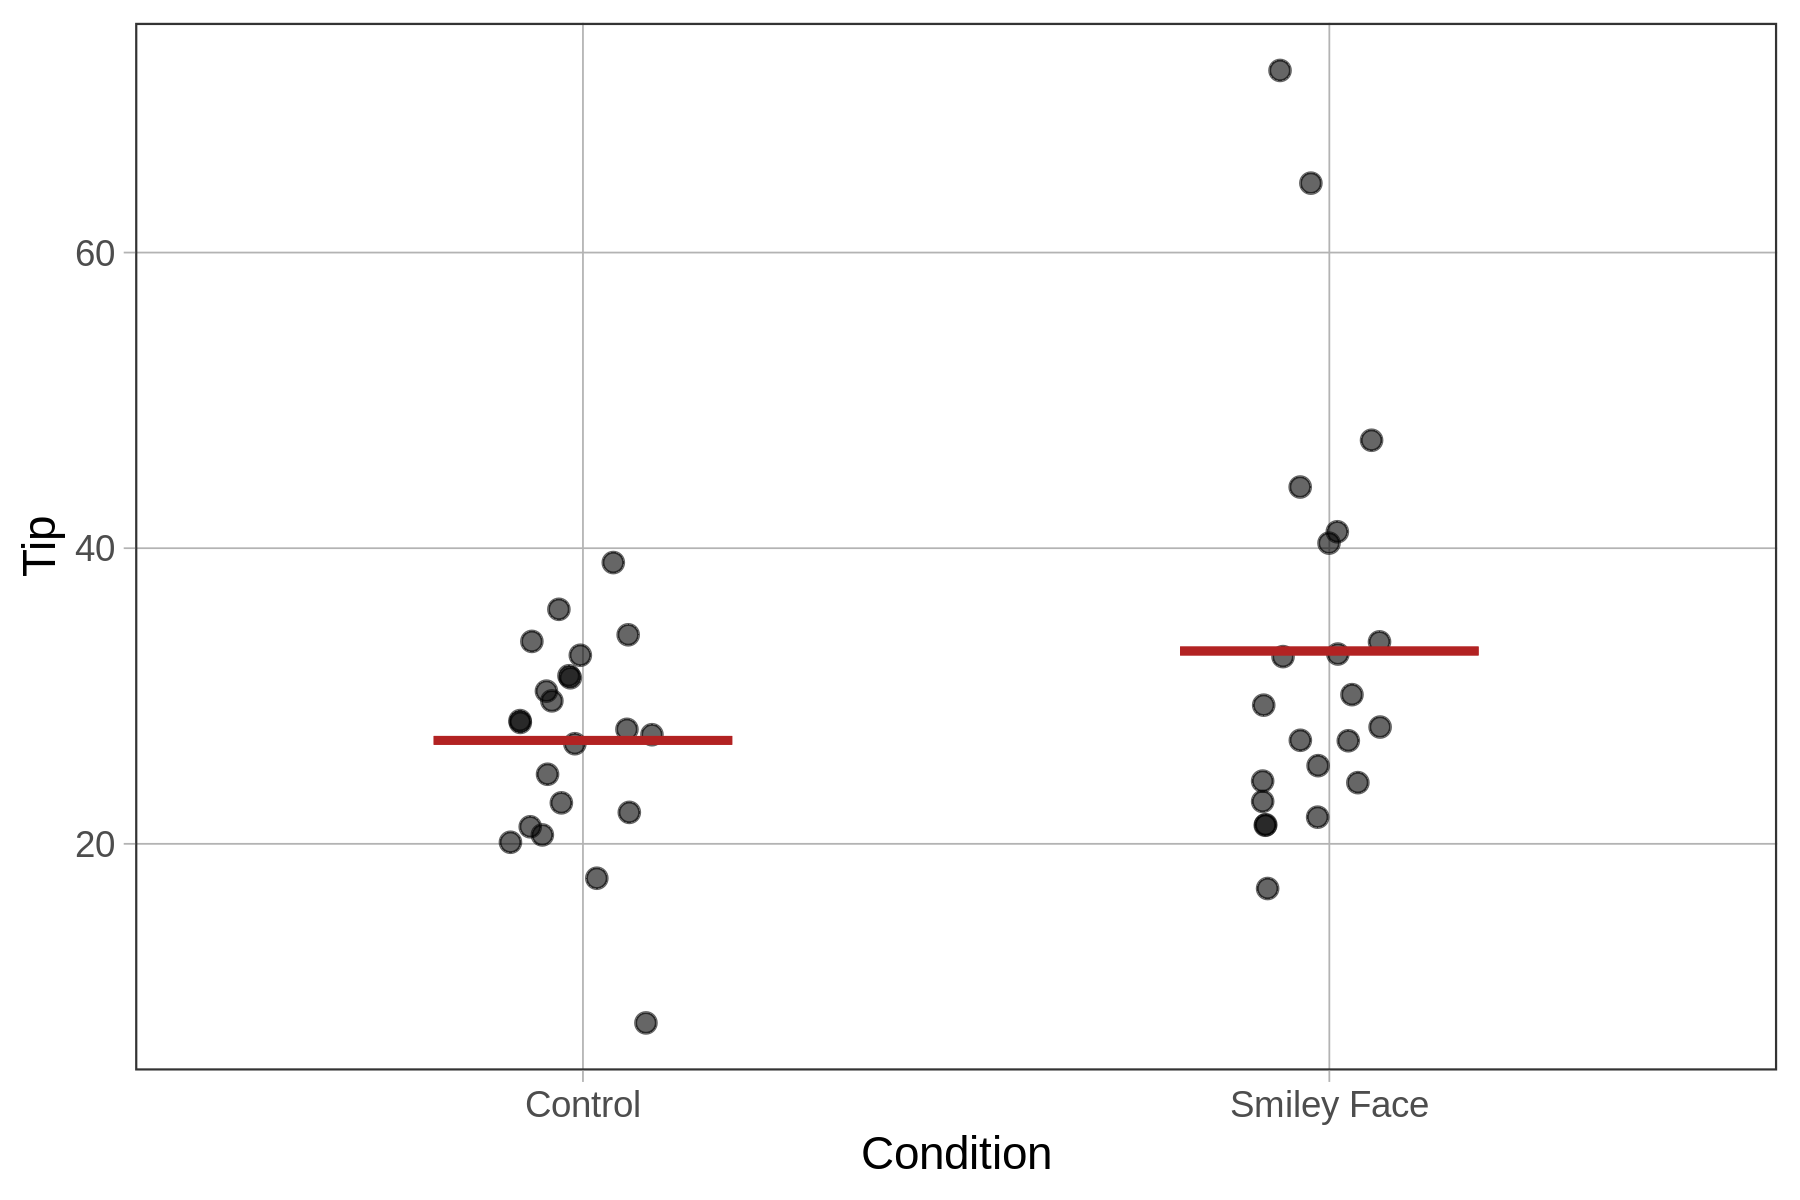 Jitter plot of Tip predicted by Condition (Control and Smiley Face). The Condition model is overlaid as red horizontal lines at the mean of each group. The line of the Smiley Face group is slightly higher than the Control group.